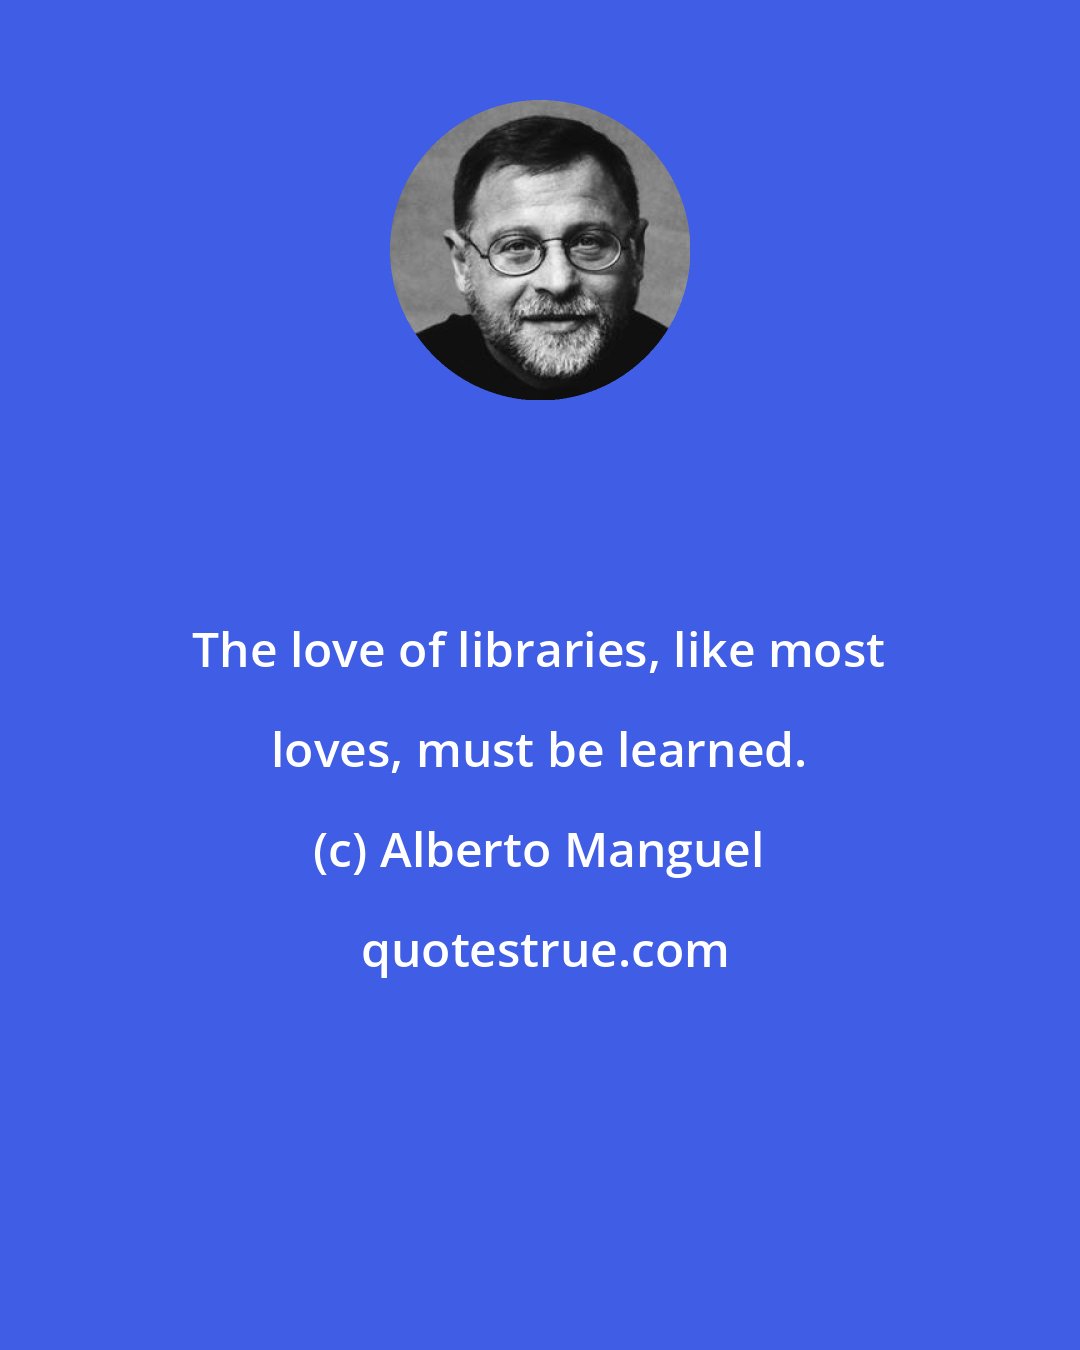 Alberto Manguel: The love of libraries, like most loves, must be learned.